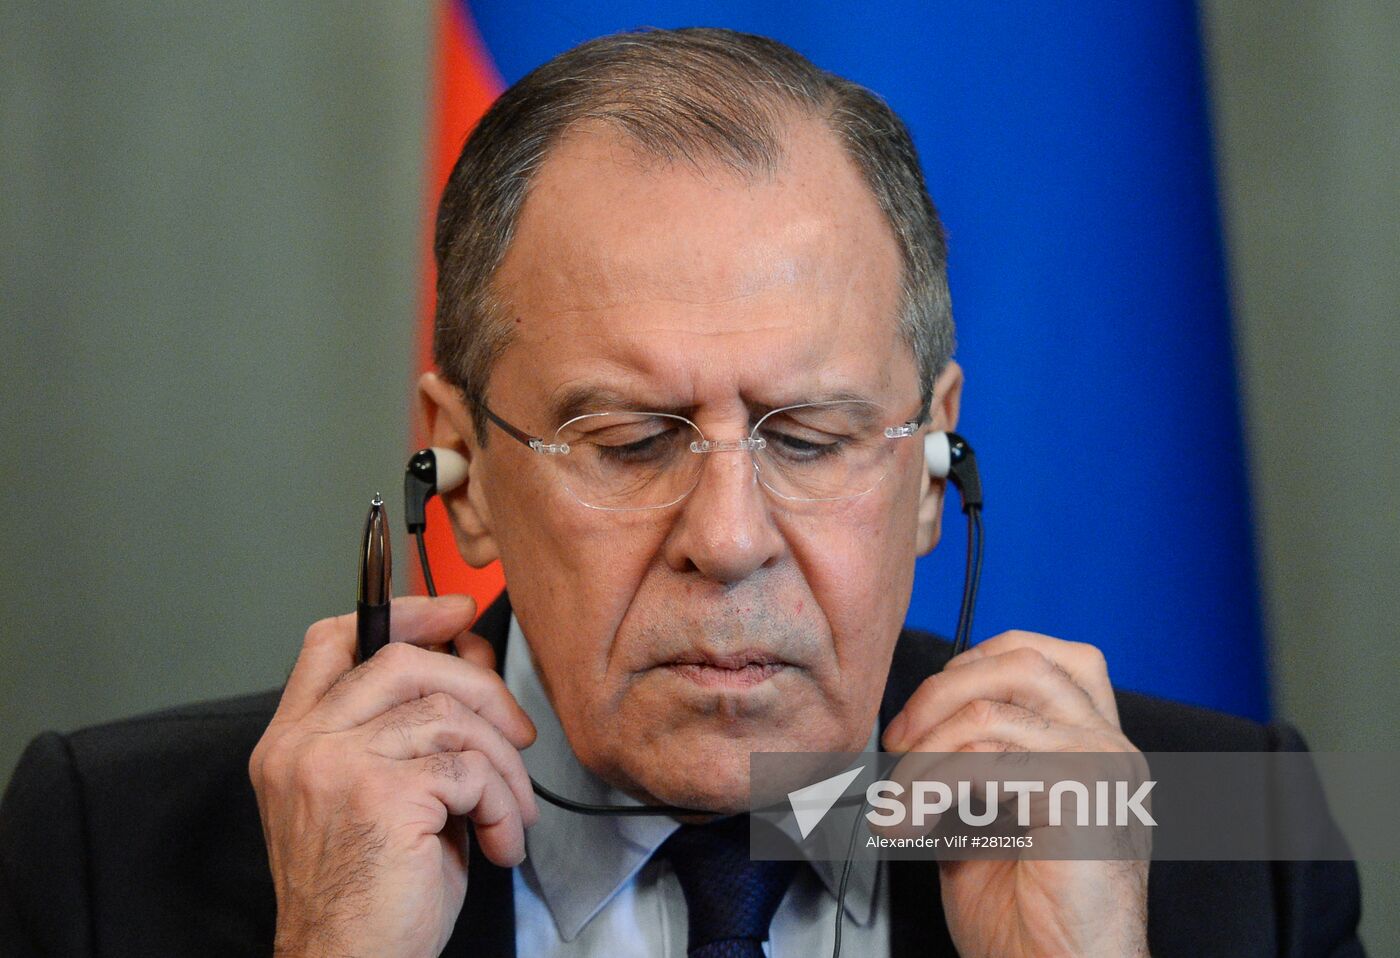 Meeting of Russian Foreign Affairs Minister Sergei Lavrov and his German counterpart Frank-Walter Steinmeier